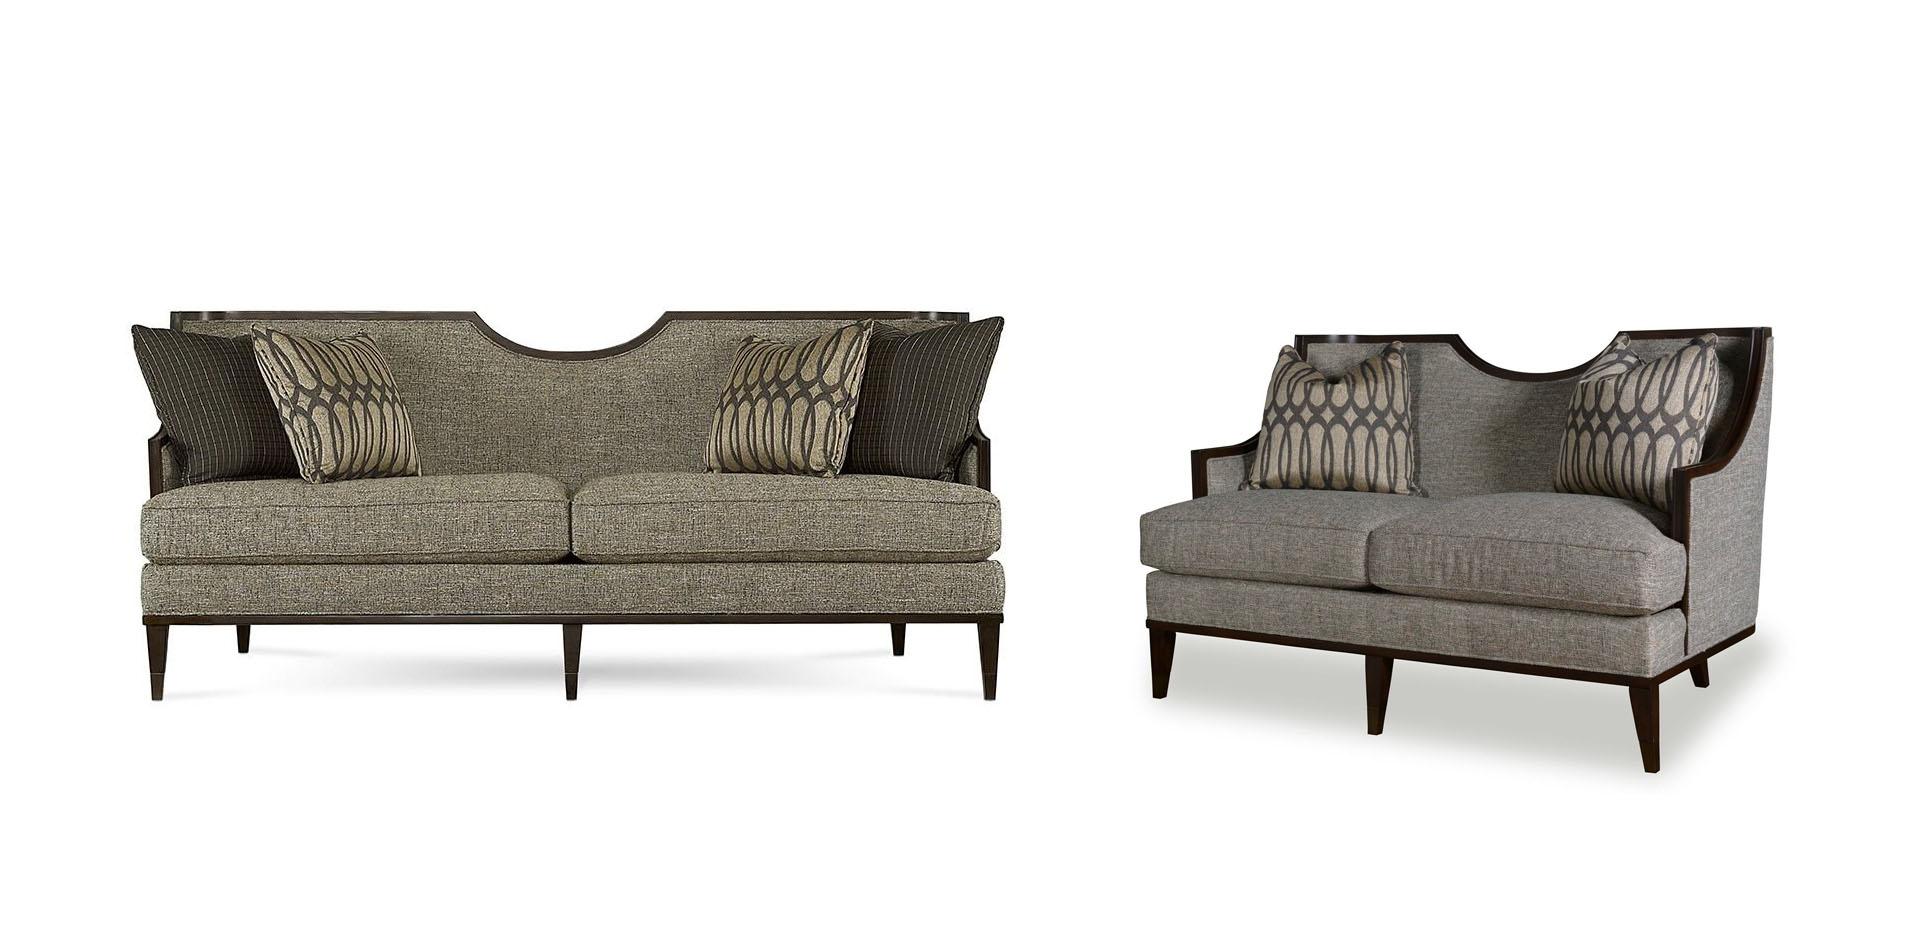 Classic, Traditional Sofa and Loveseat Intrigue Harper 161501-5036AA-2pcs in Brown Fabric